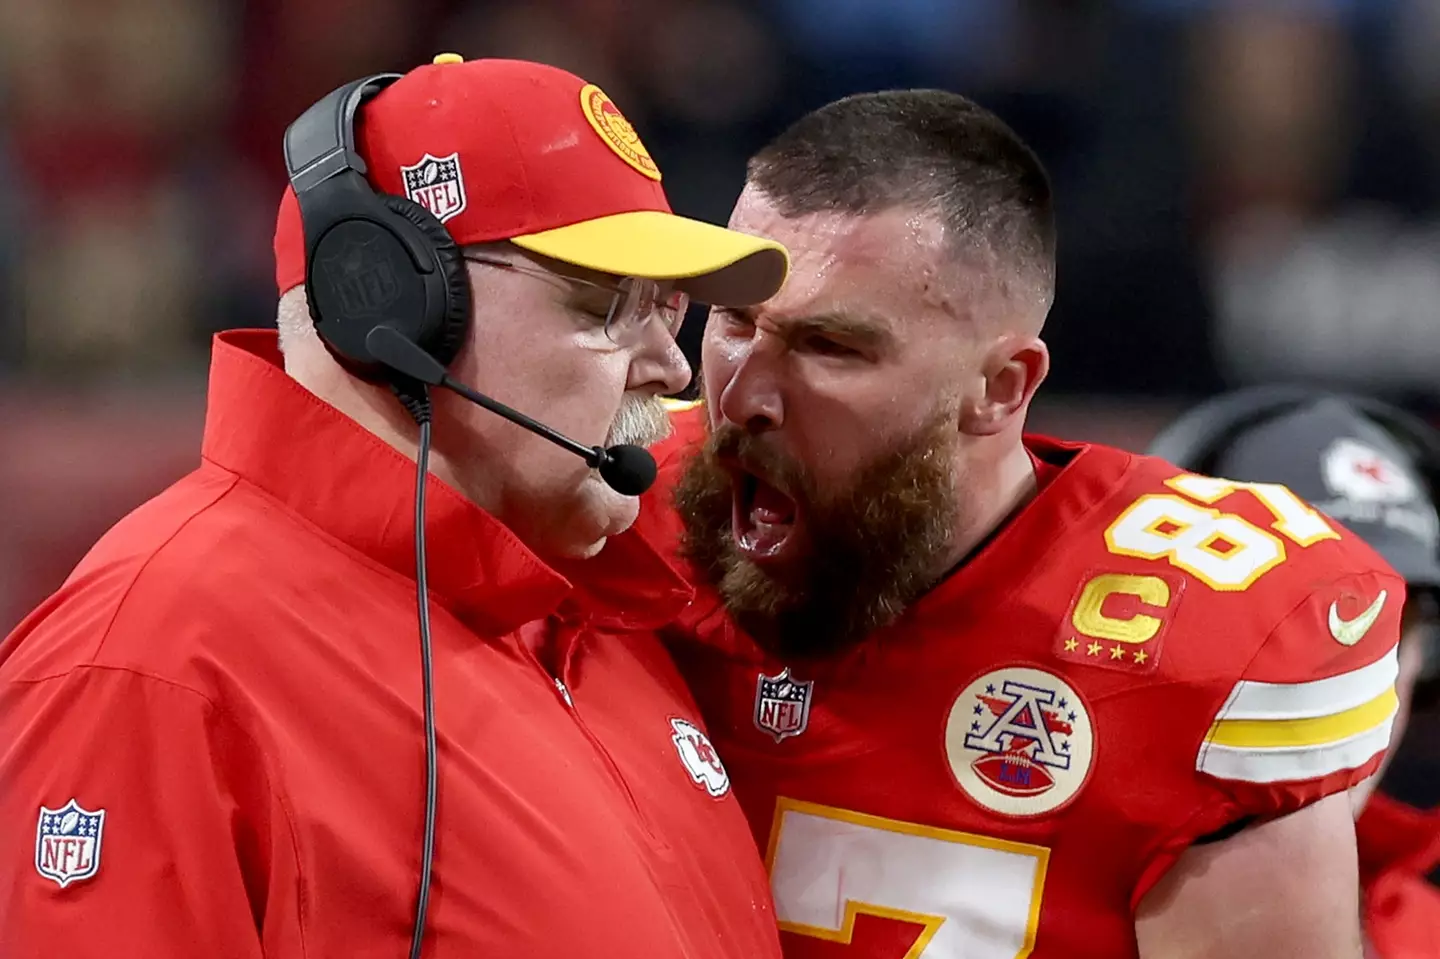 Travis Kelce made headlines following the altercation.